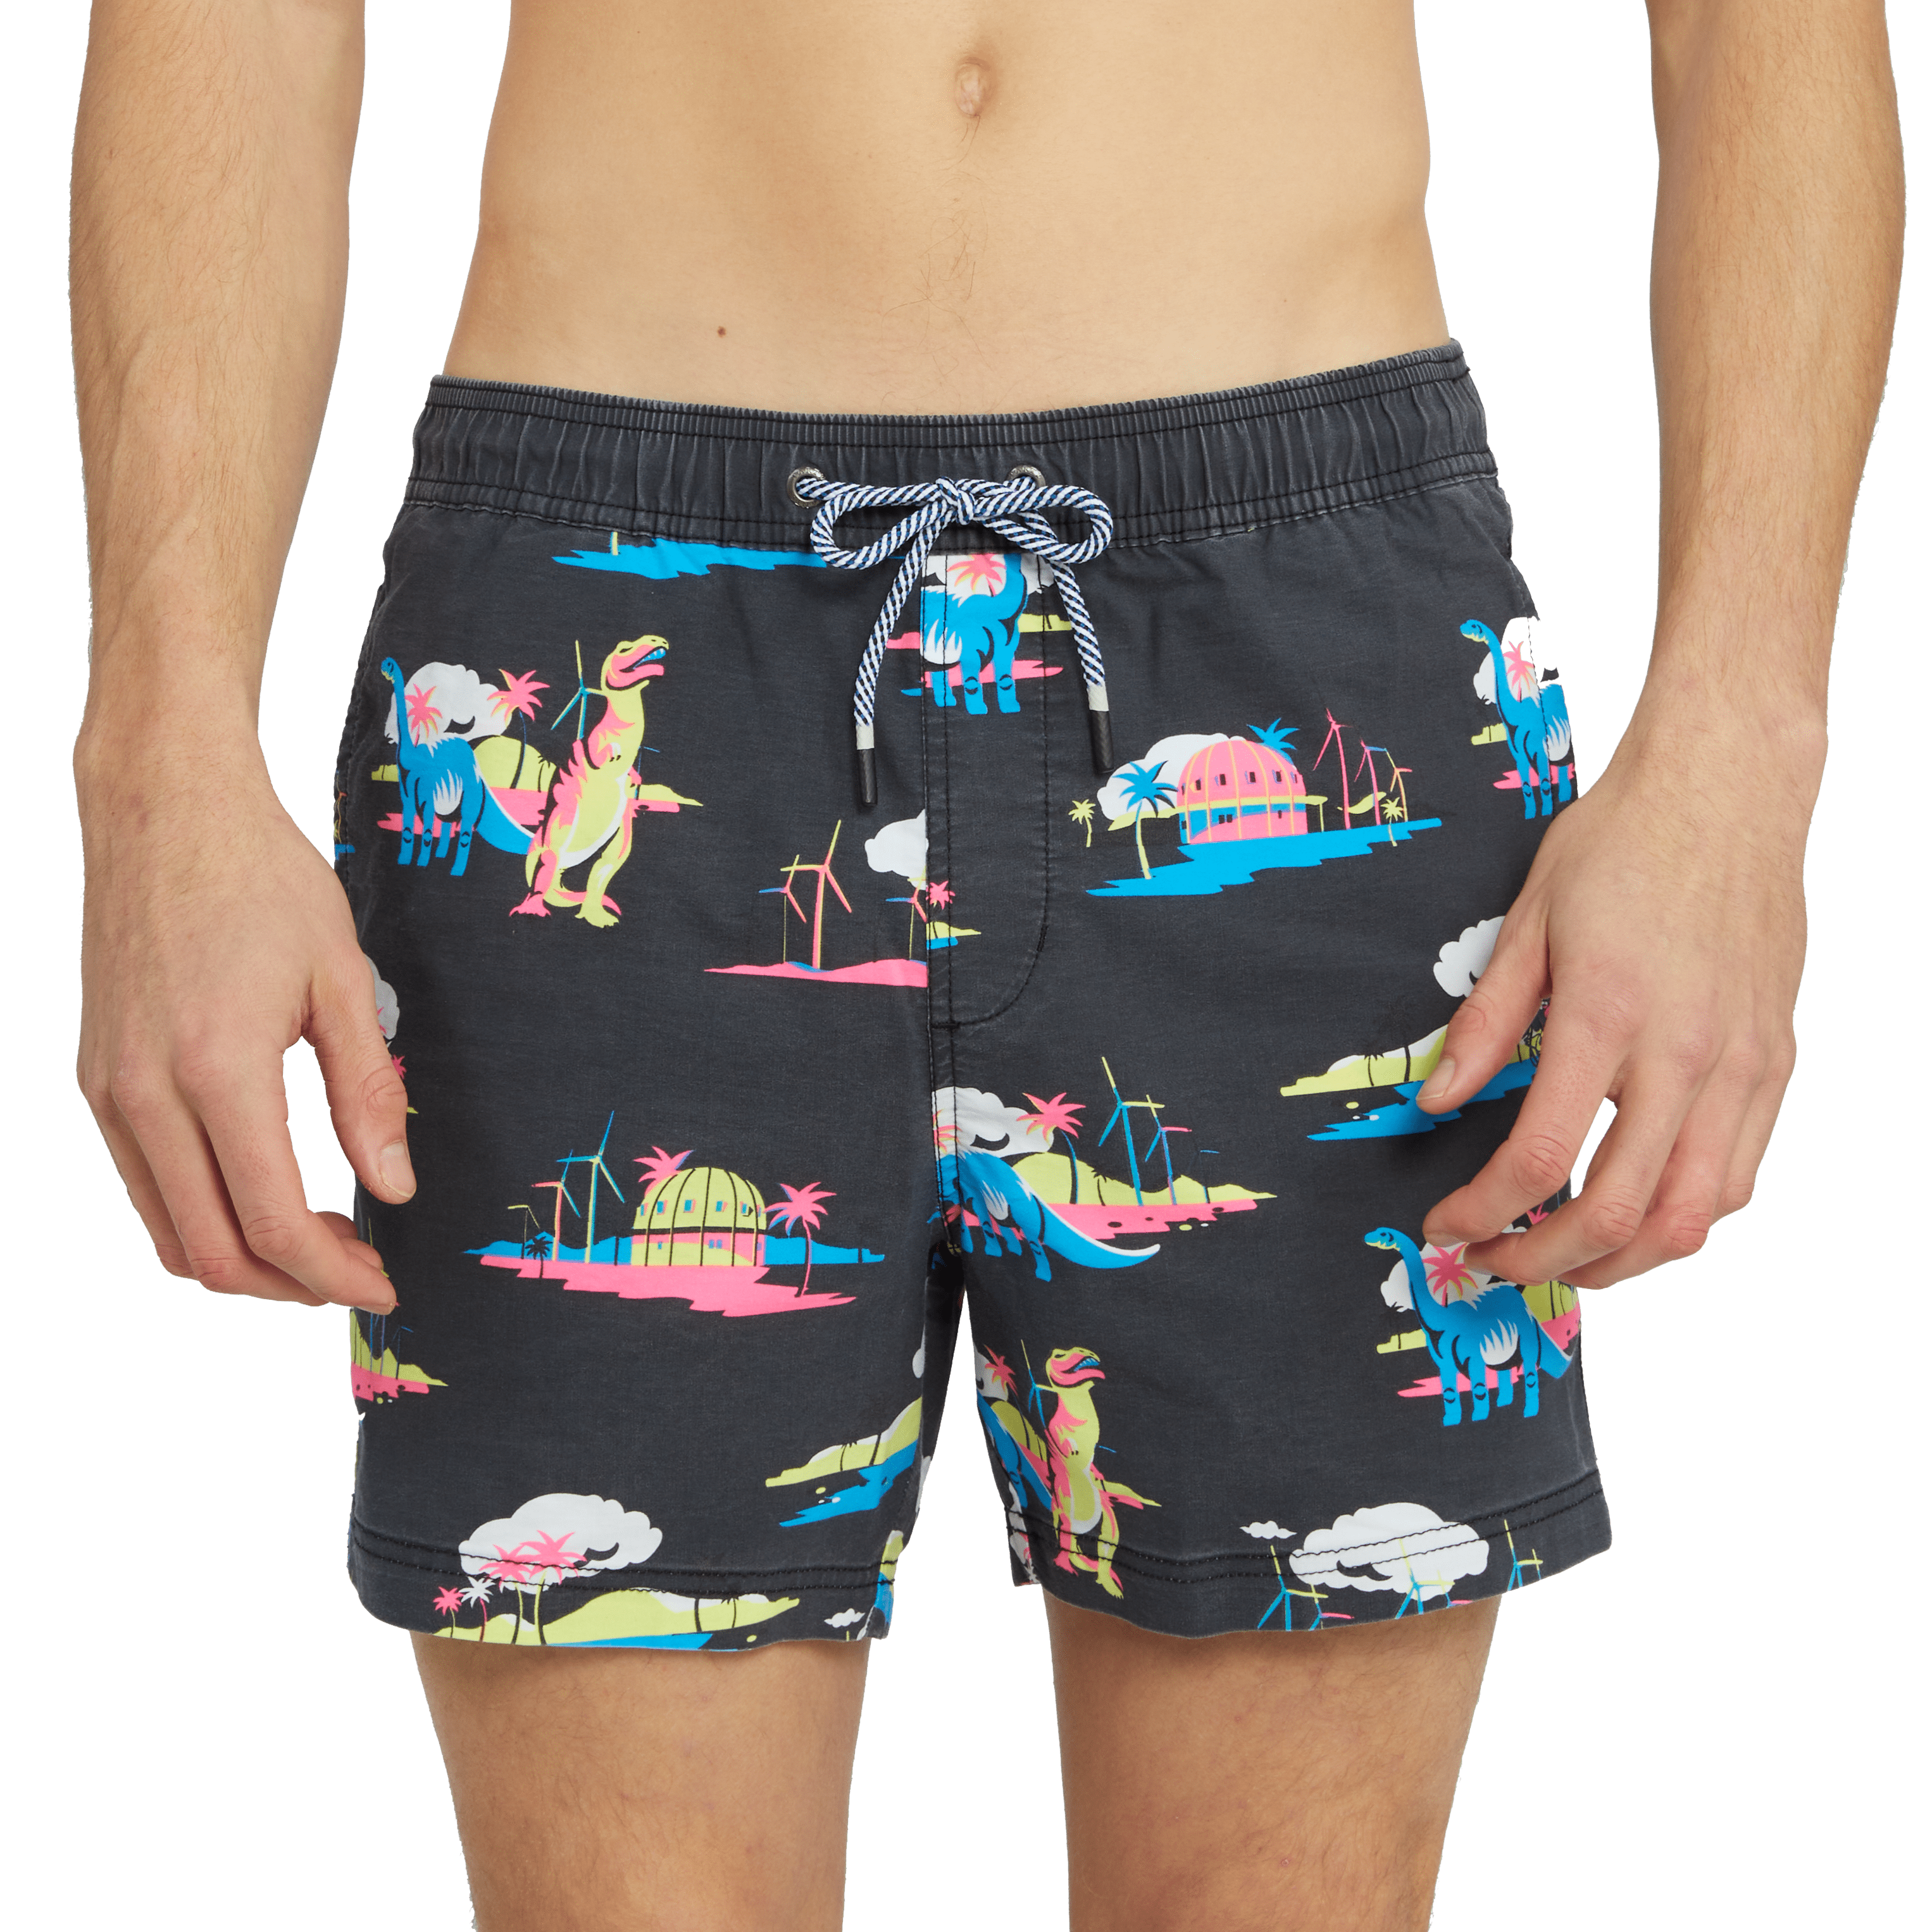 PALM SPRINGS PARTY STARTER SHORT - BLACK PRINTED SHORTS PARTY PANTS 